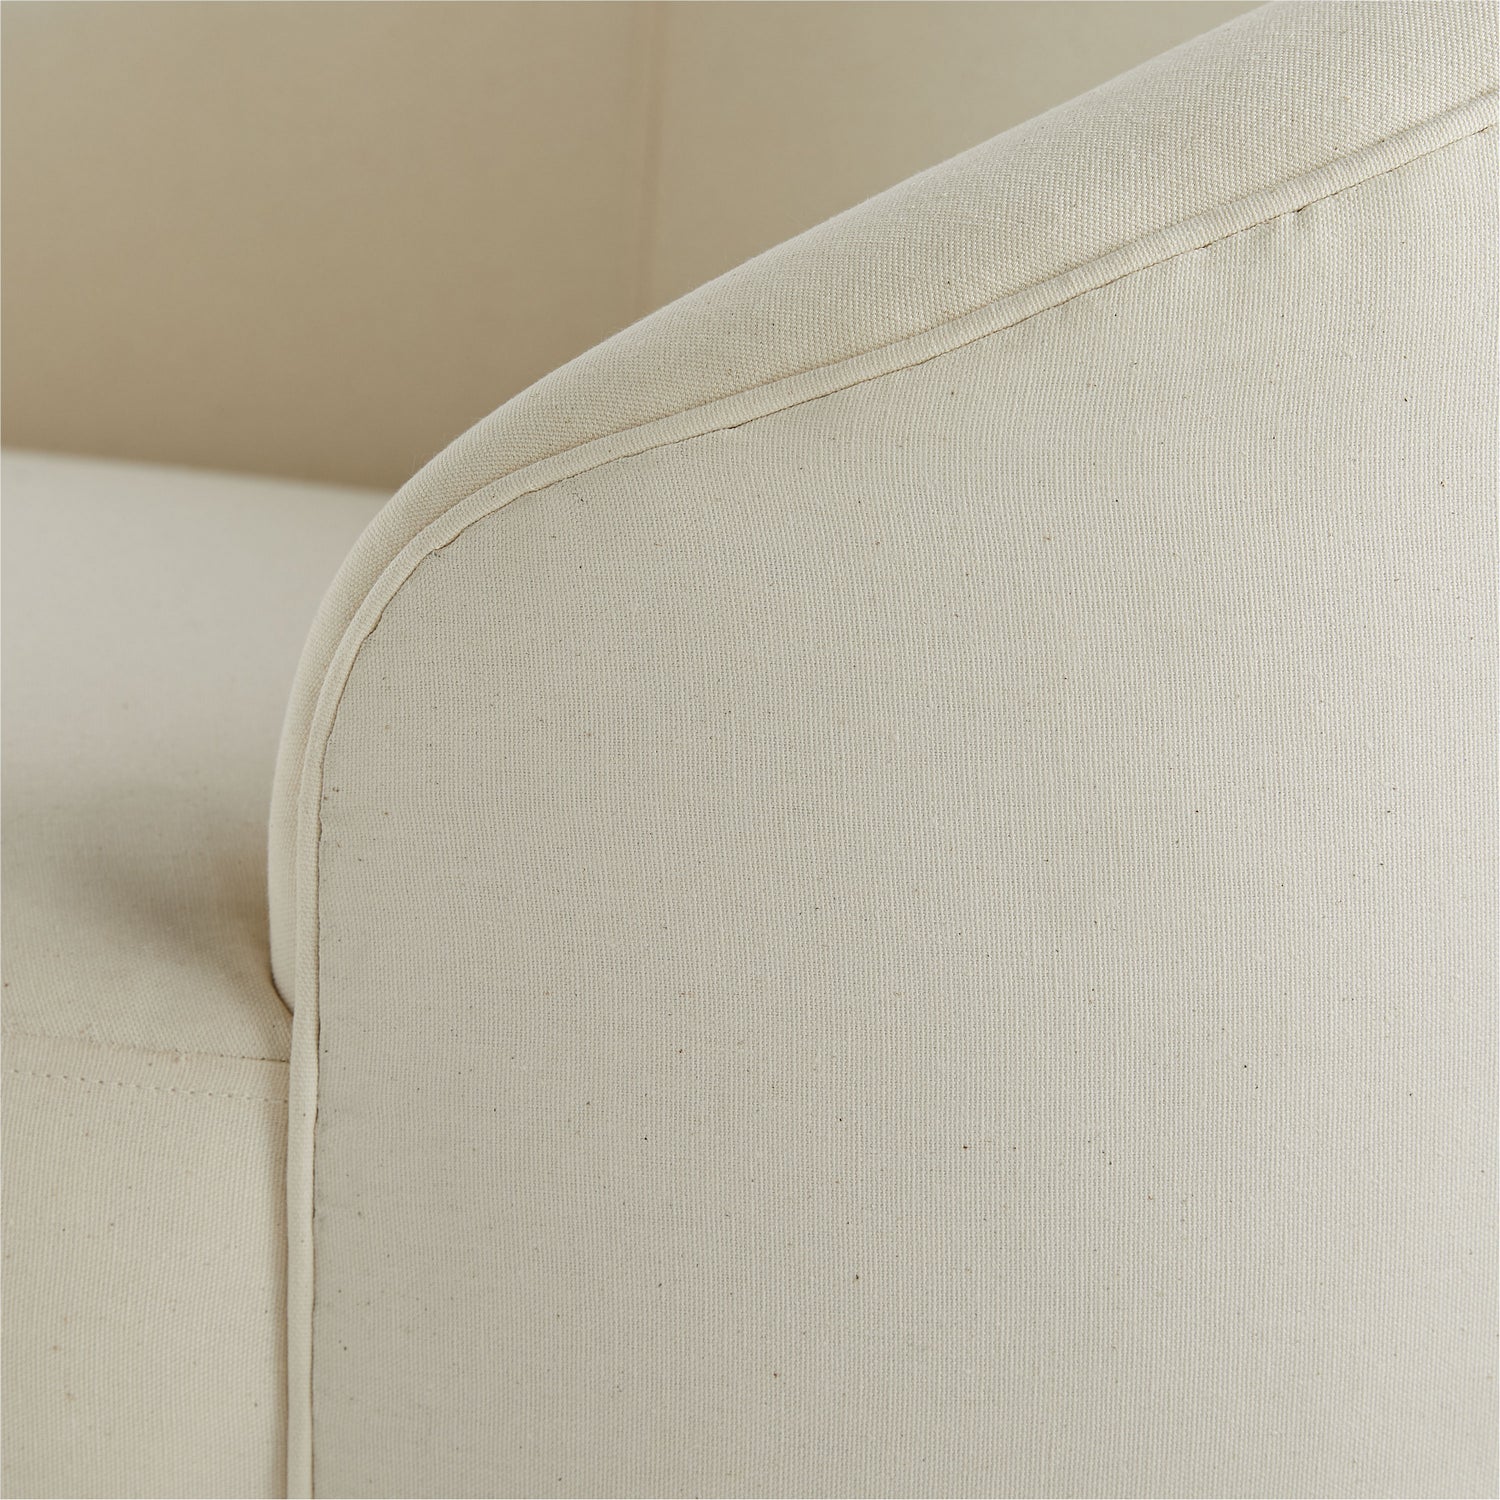 Chaise from the Turner collection in White finish